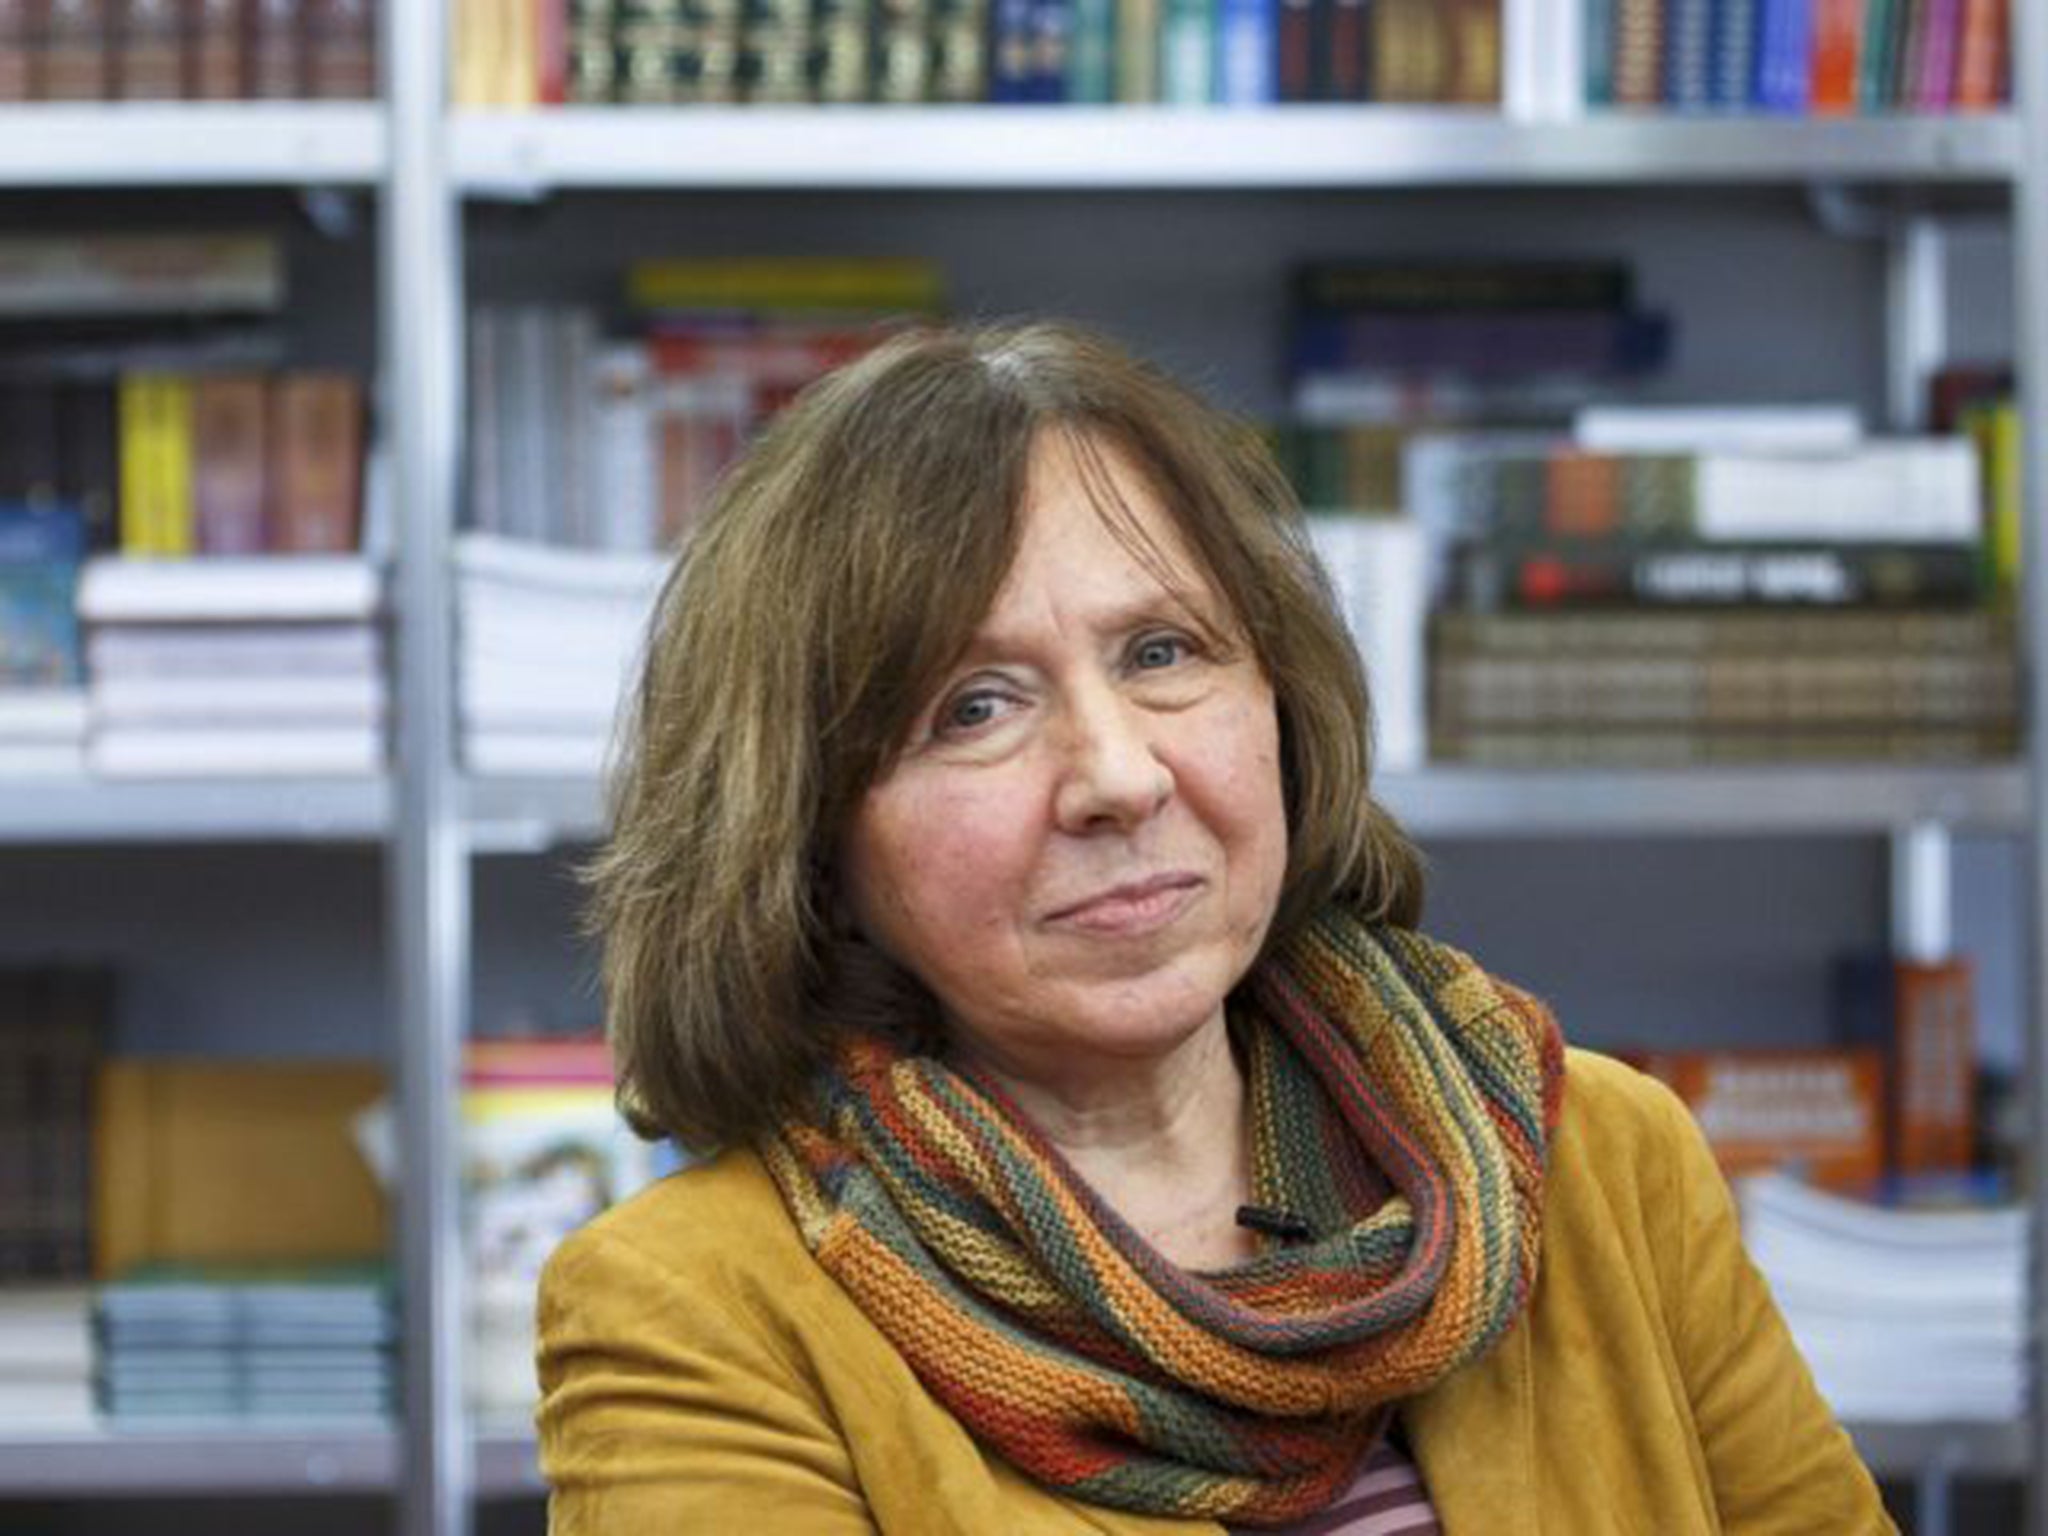 Svetlana Alexievich impressed the judges with her ‘polyphonic writings’